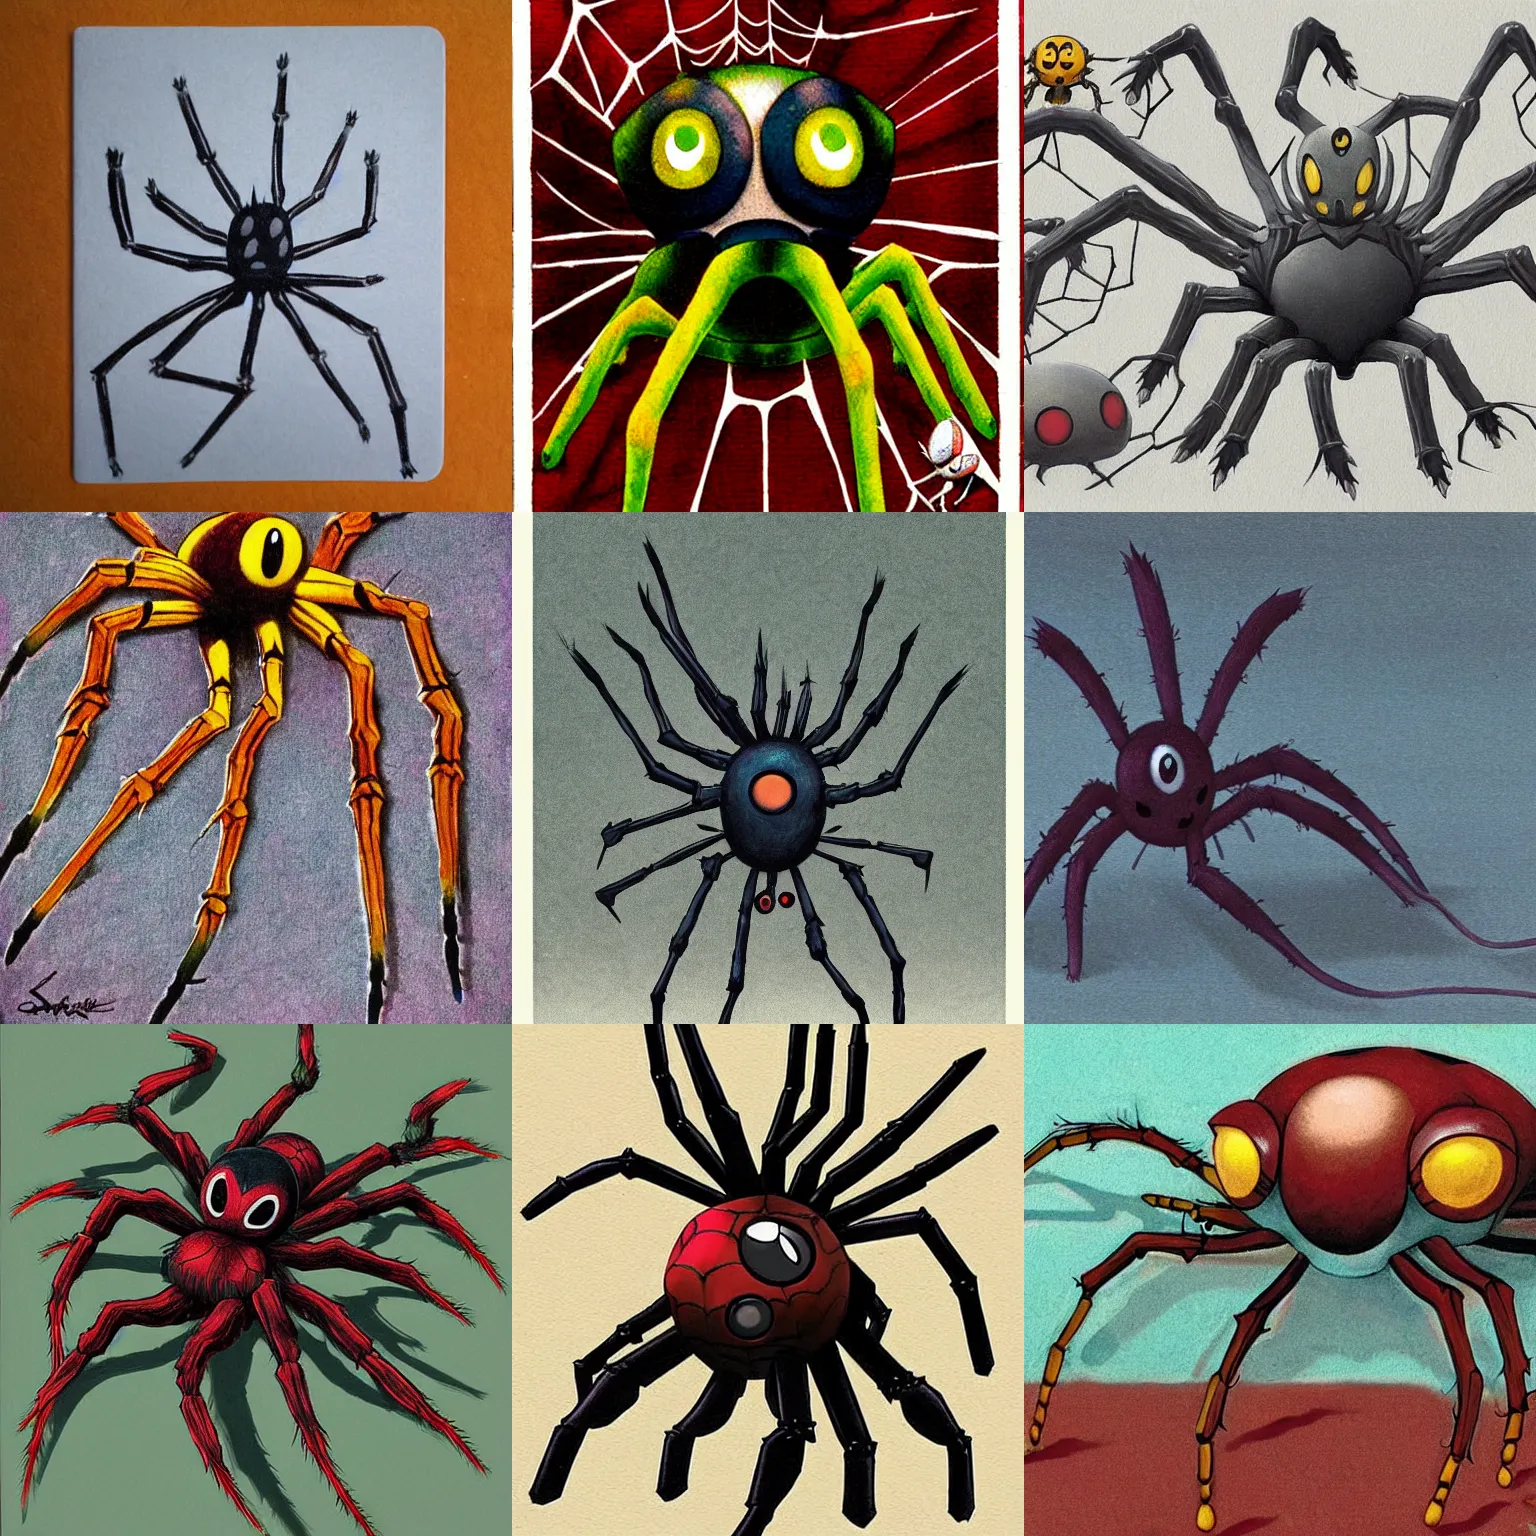 Prompt: spider type pokemon by shaun tan, style of junji ito